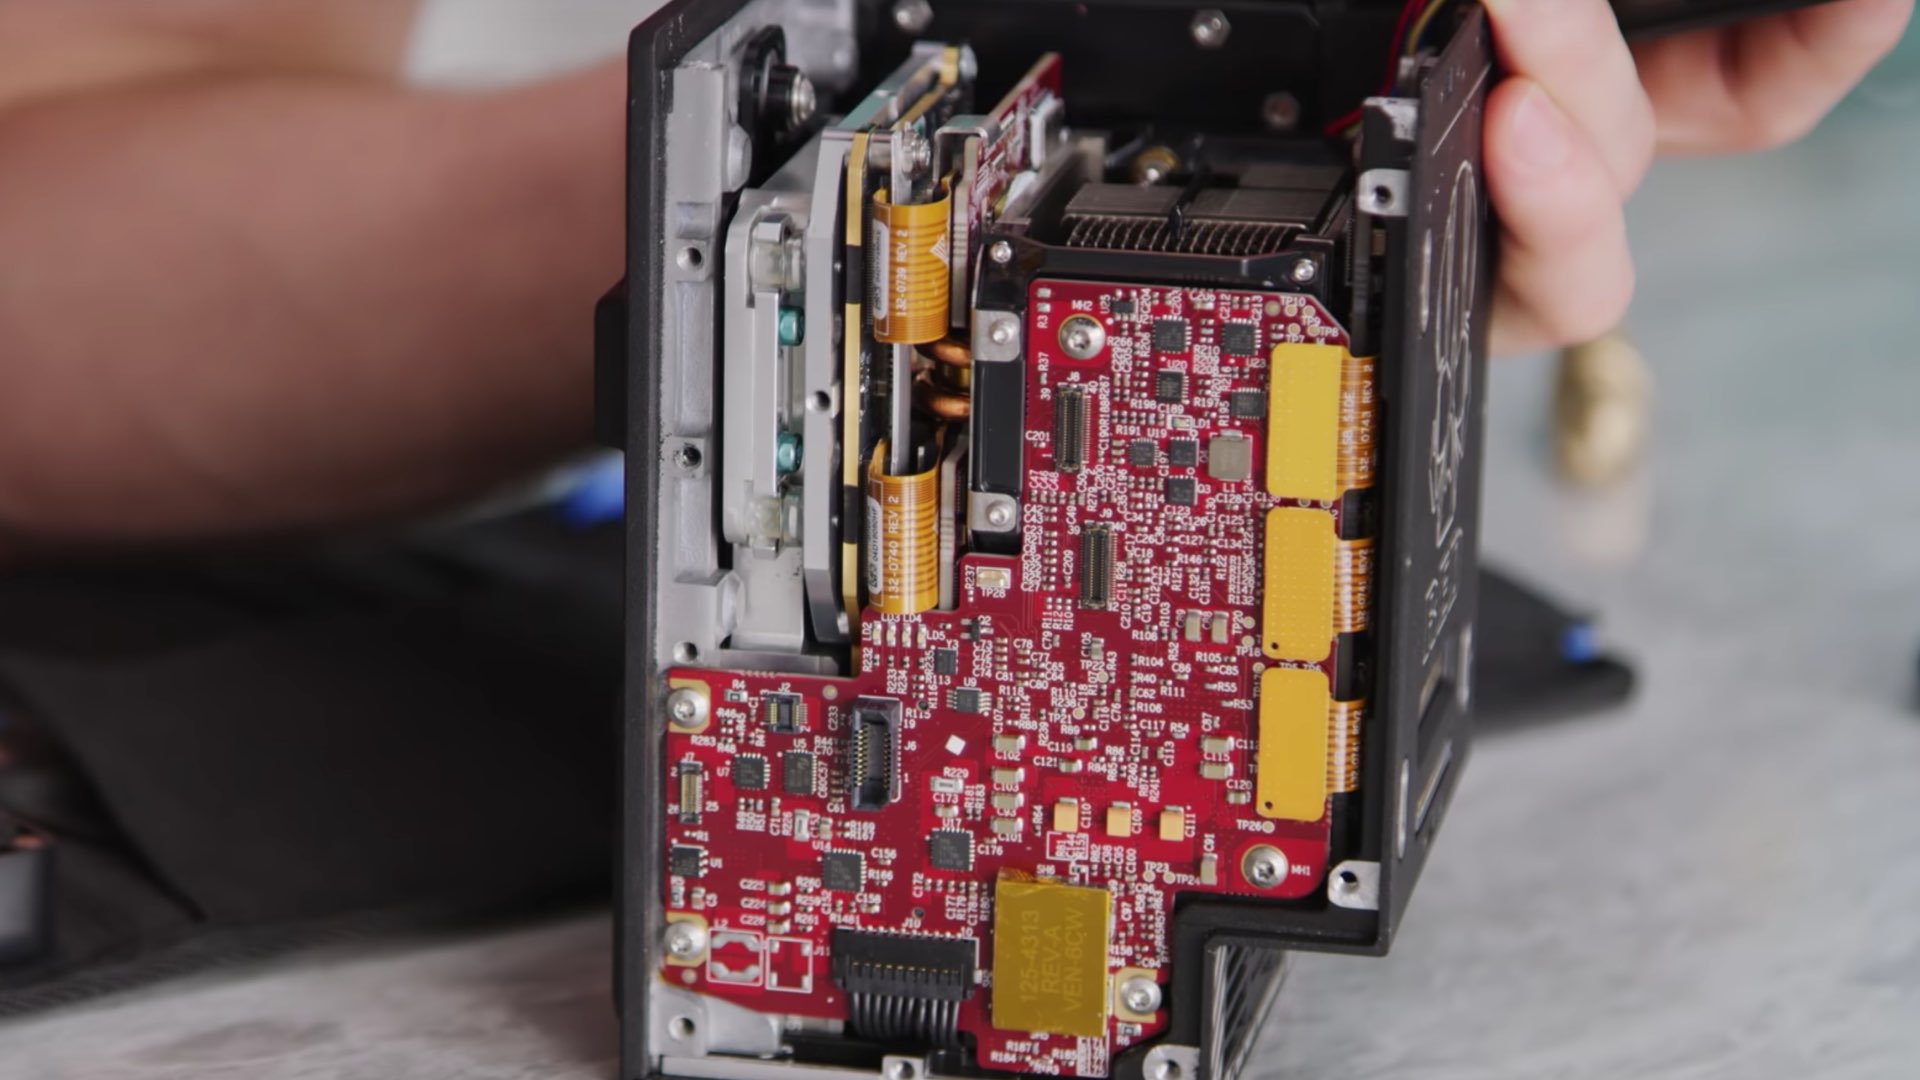 Disassembling the RED HELIUM 8K